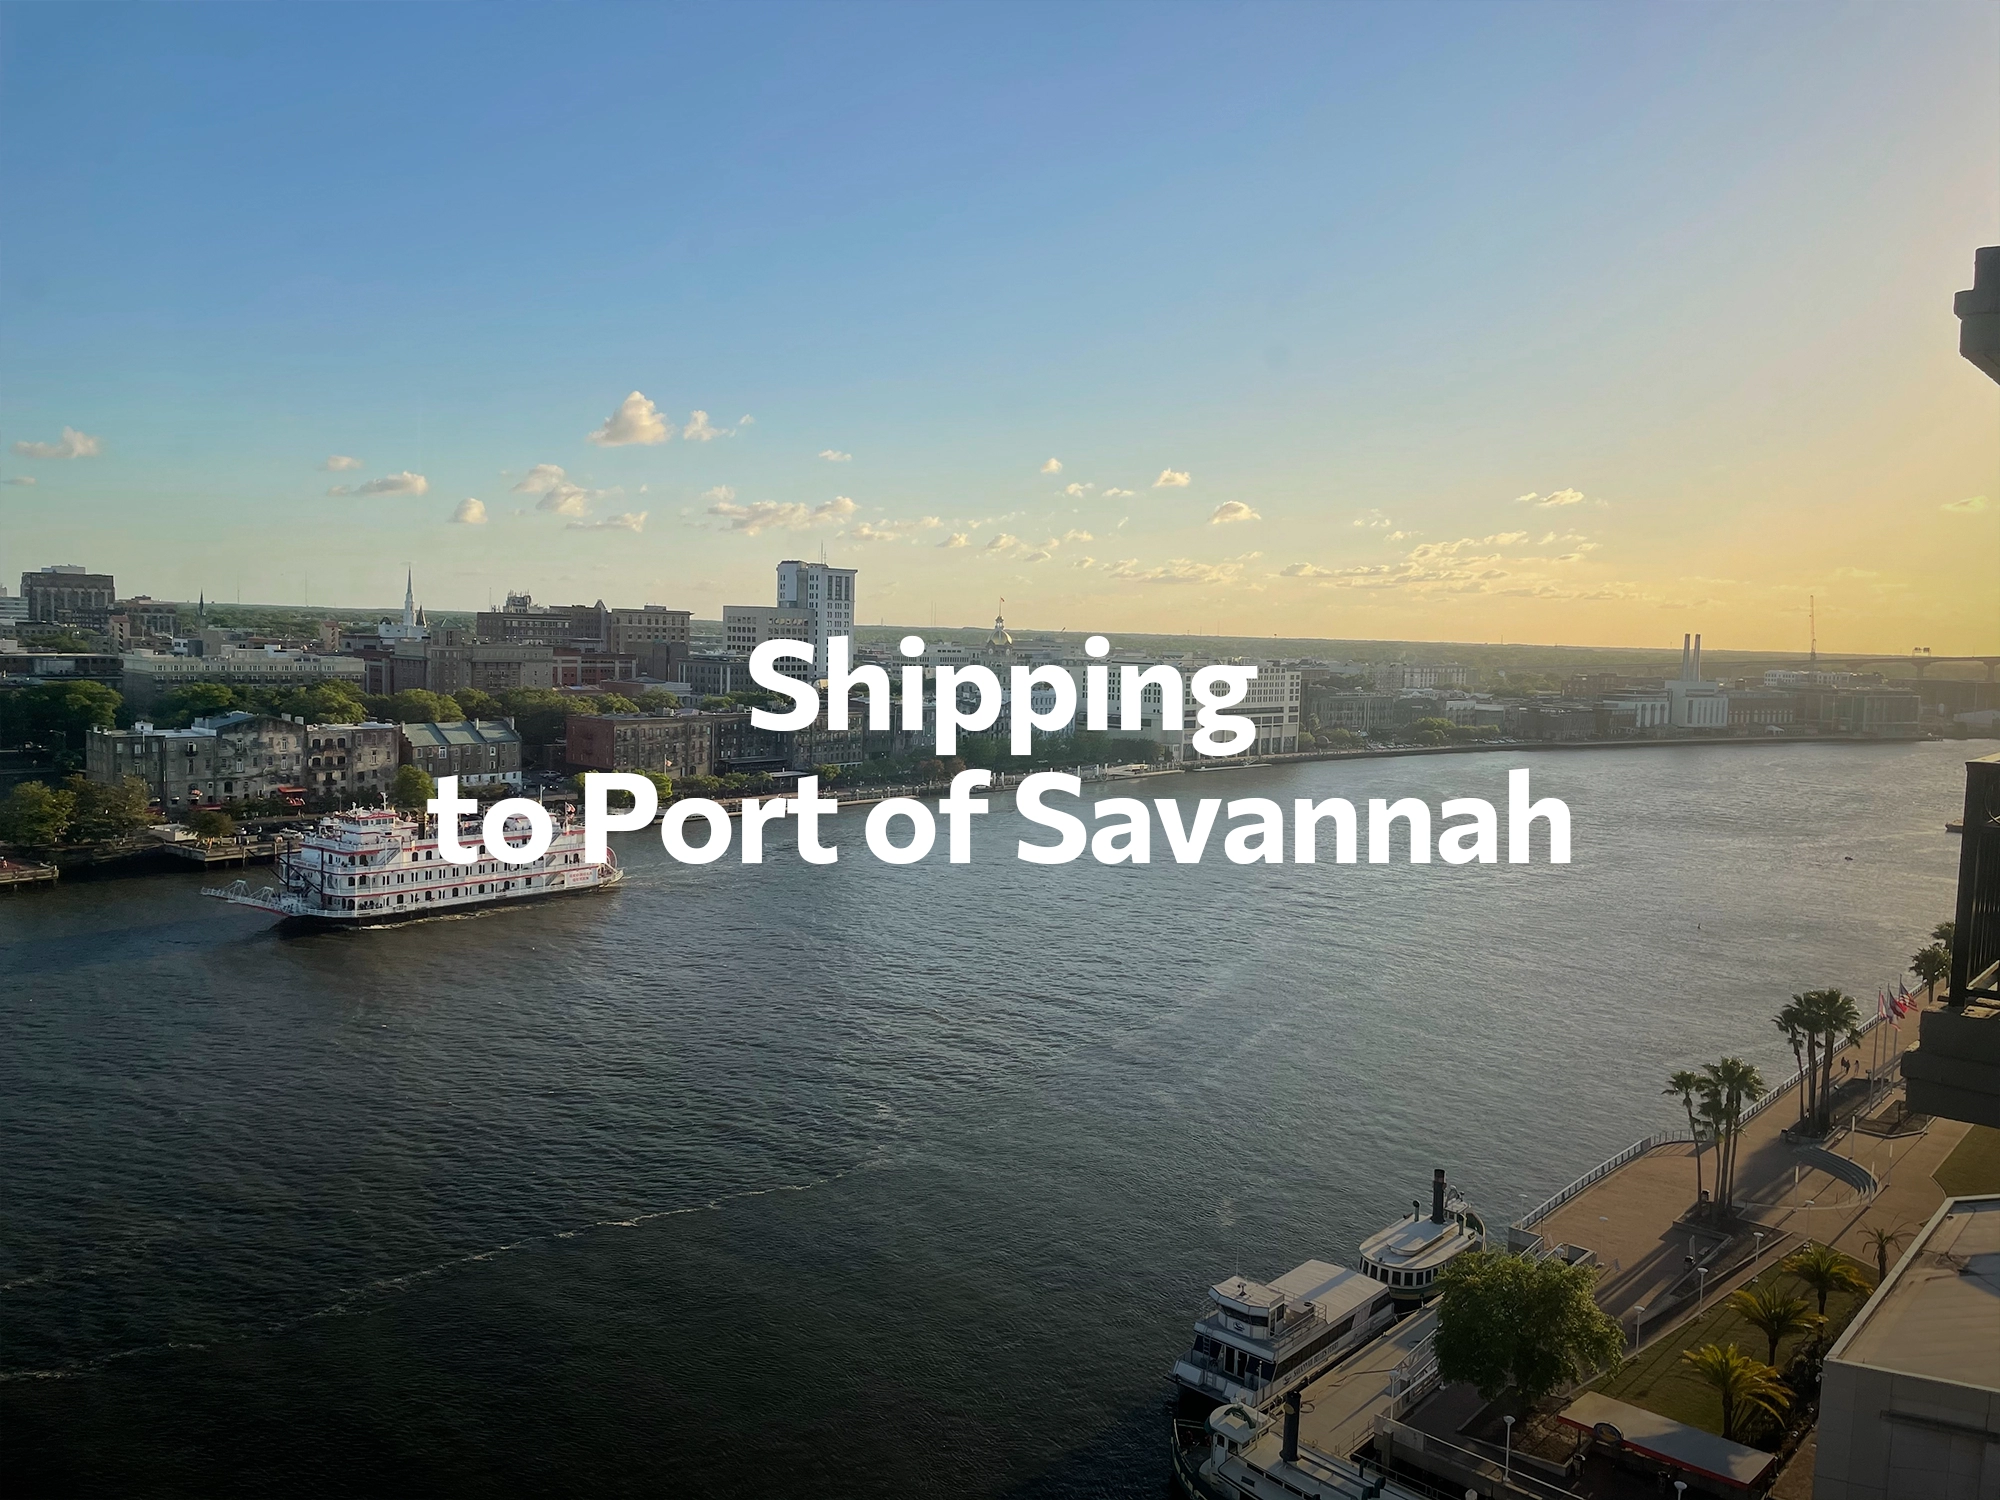 Shipping company to Alabama, freight rates for FTL and LTL shipping in Alabama